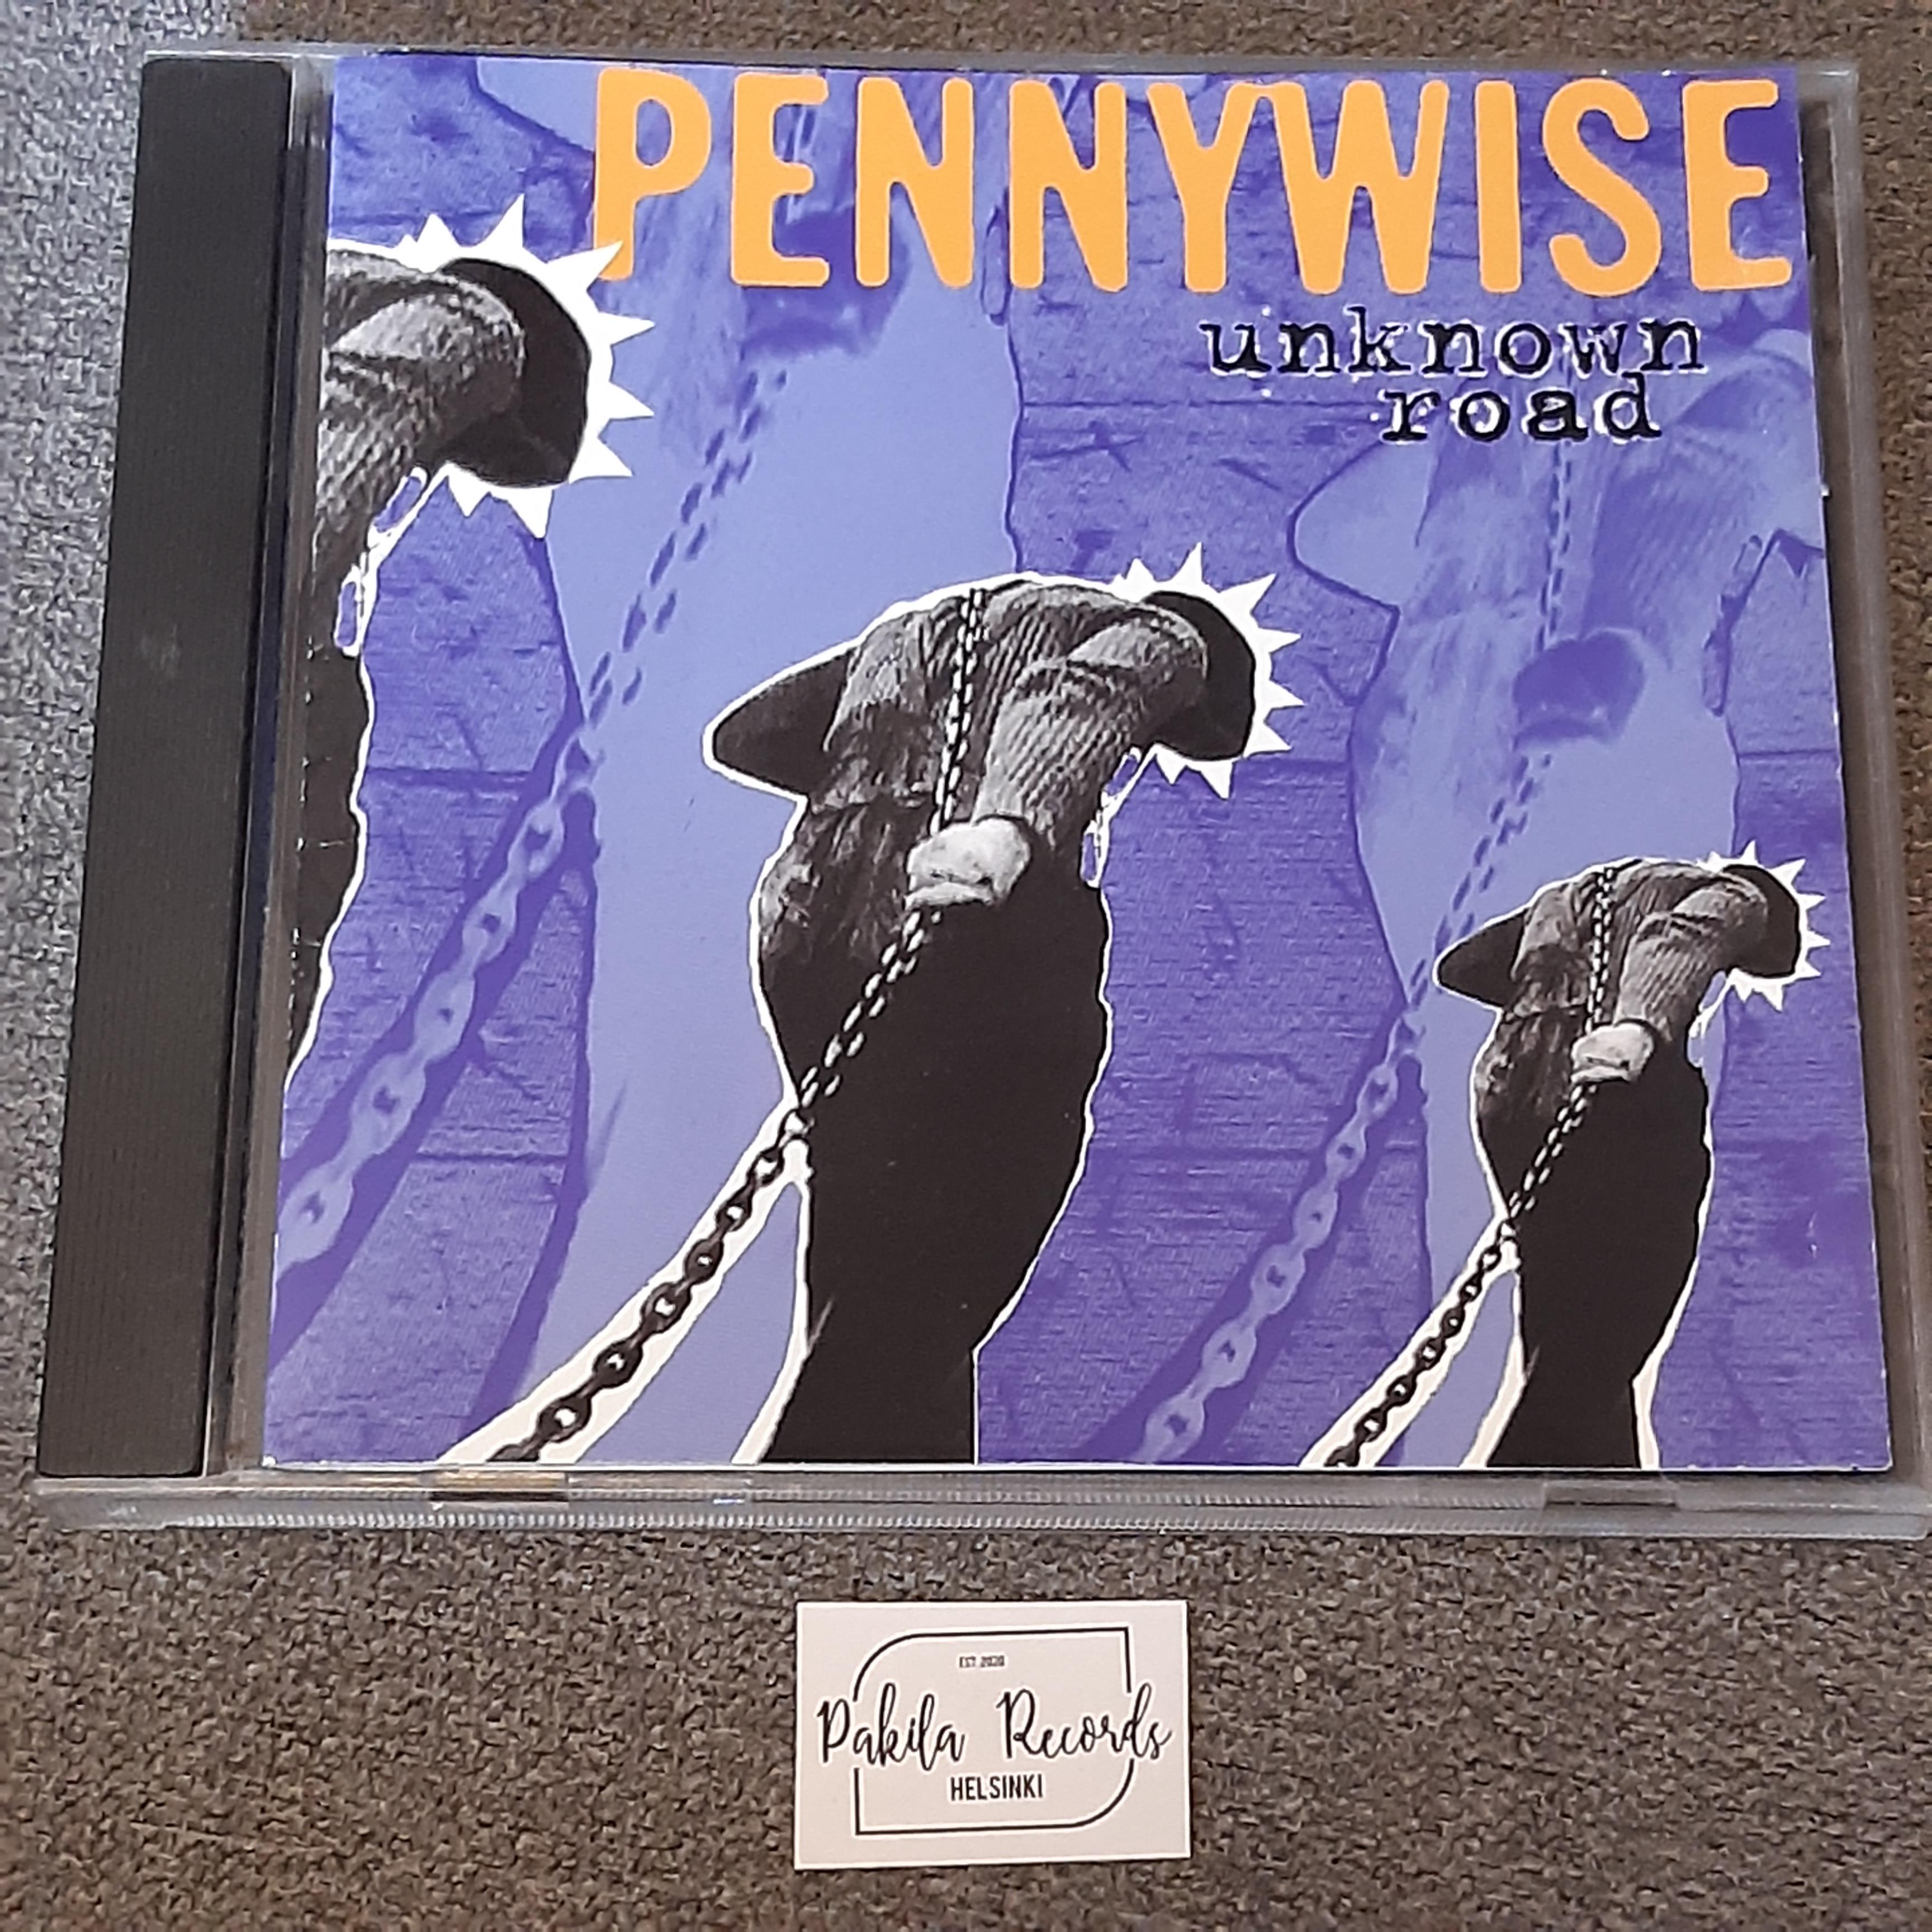 Pennywise - Unknown Road - CD (käytetty)